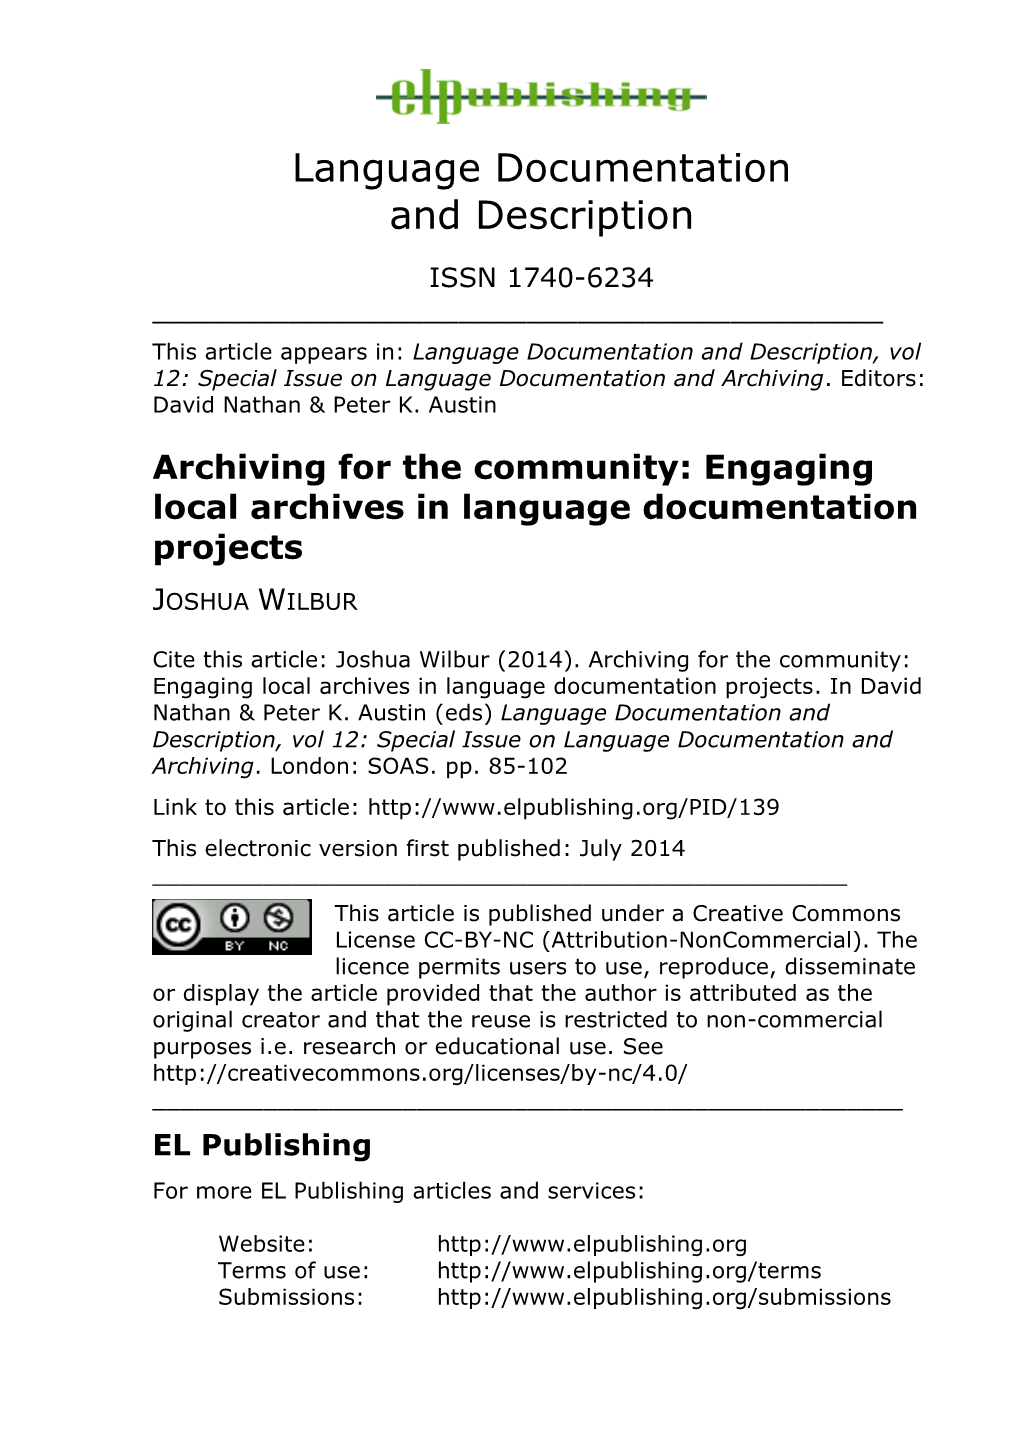 Archiving for the Community: Engaging Local Archives in Language Documentation Projects